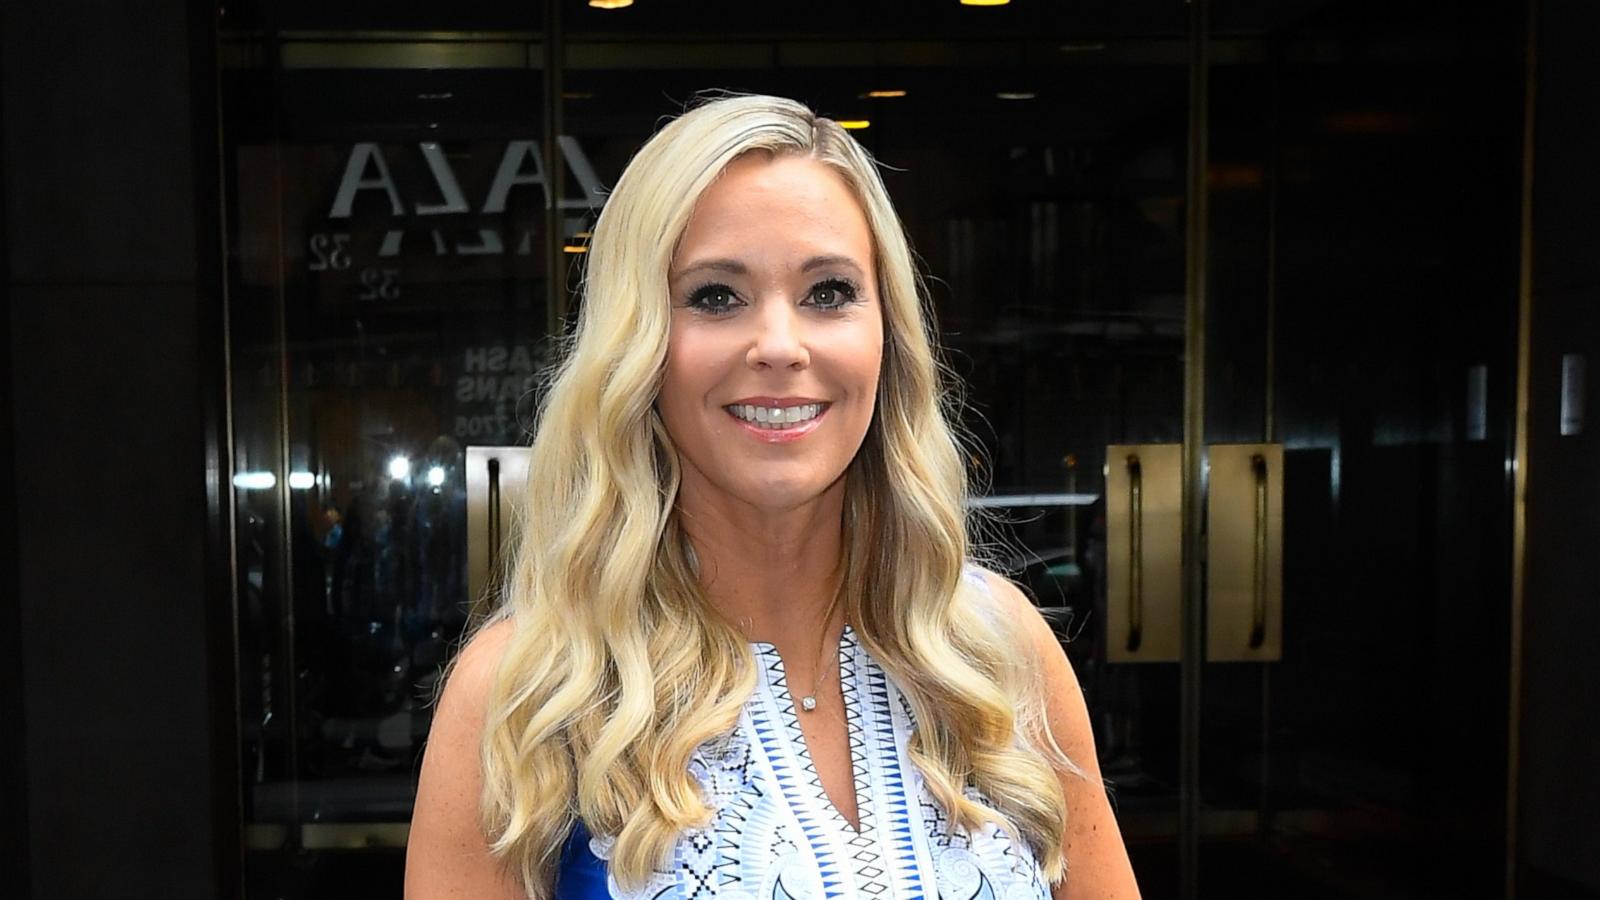 PHOTO: Kate Gosselin is seen outside the "Today" show in New York City, June 11, 2019.